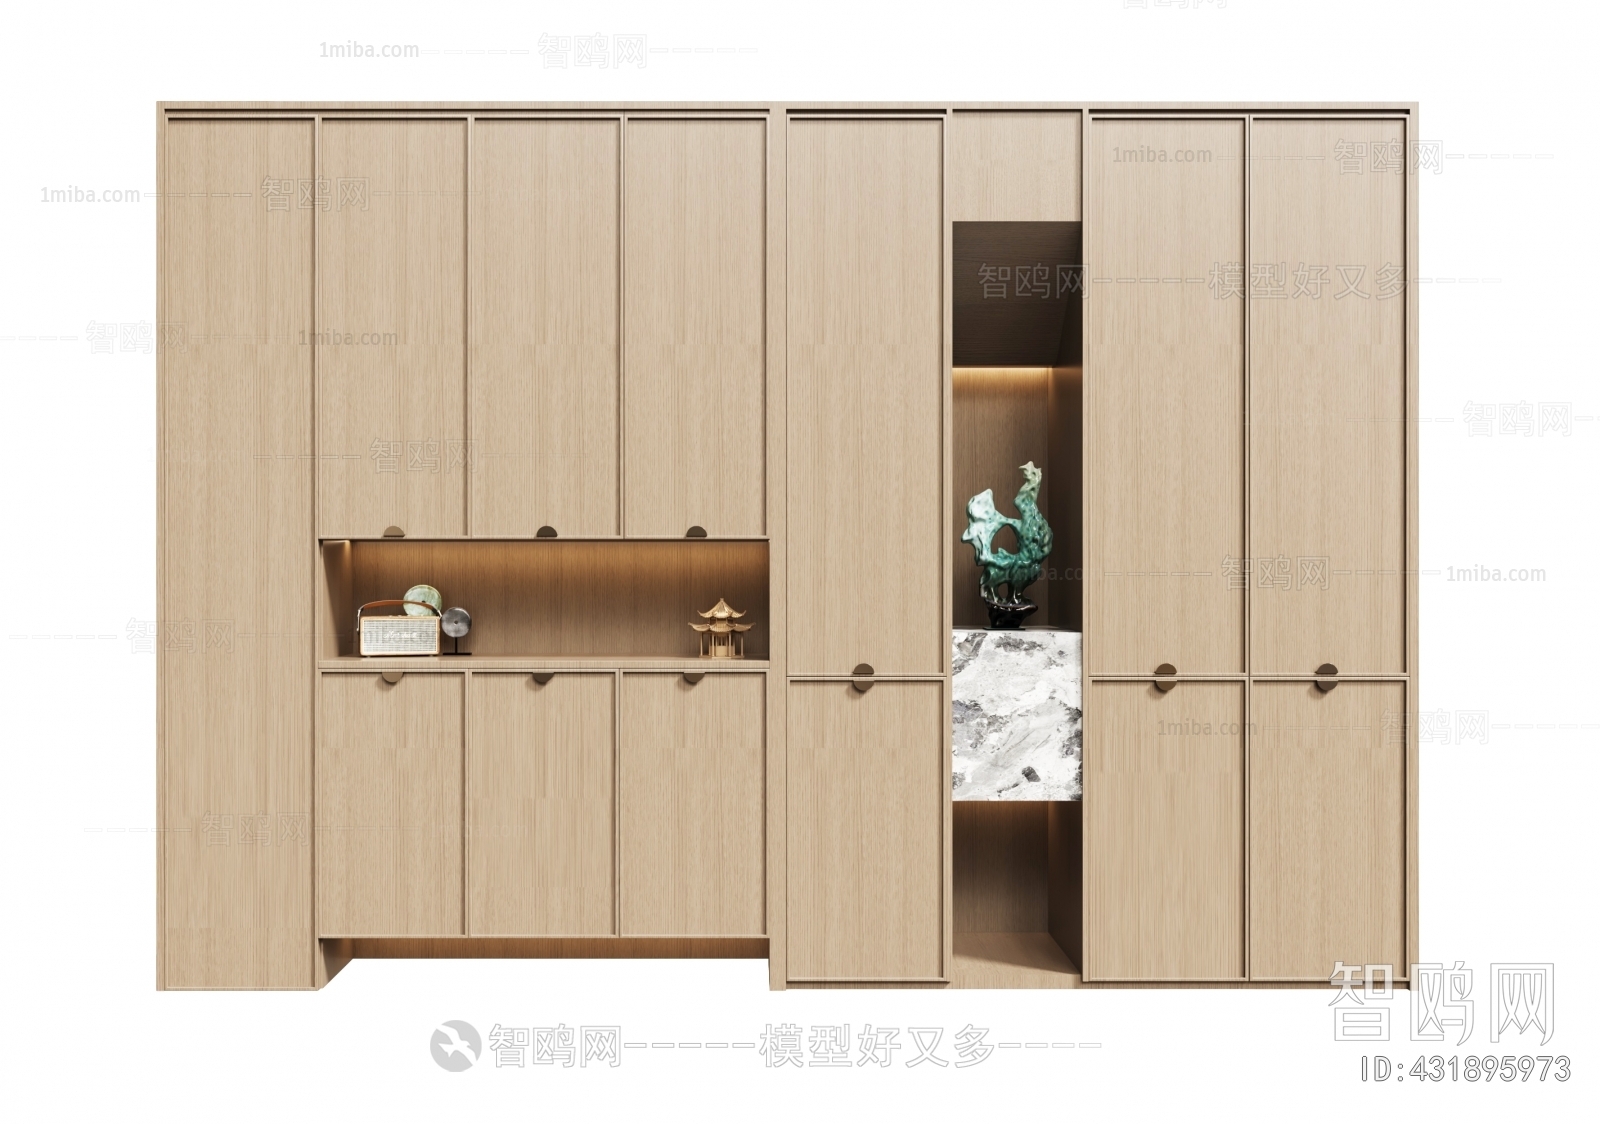 New Chinese Style Shoe Cabinet